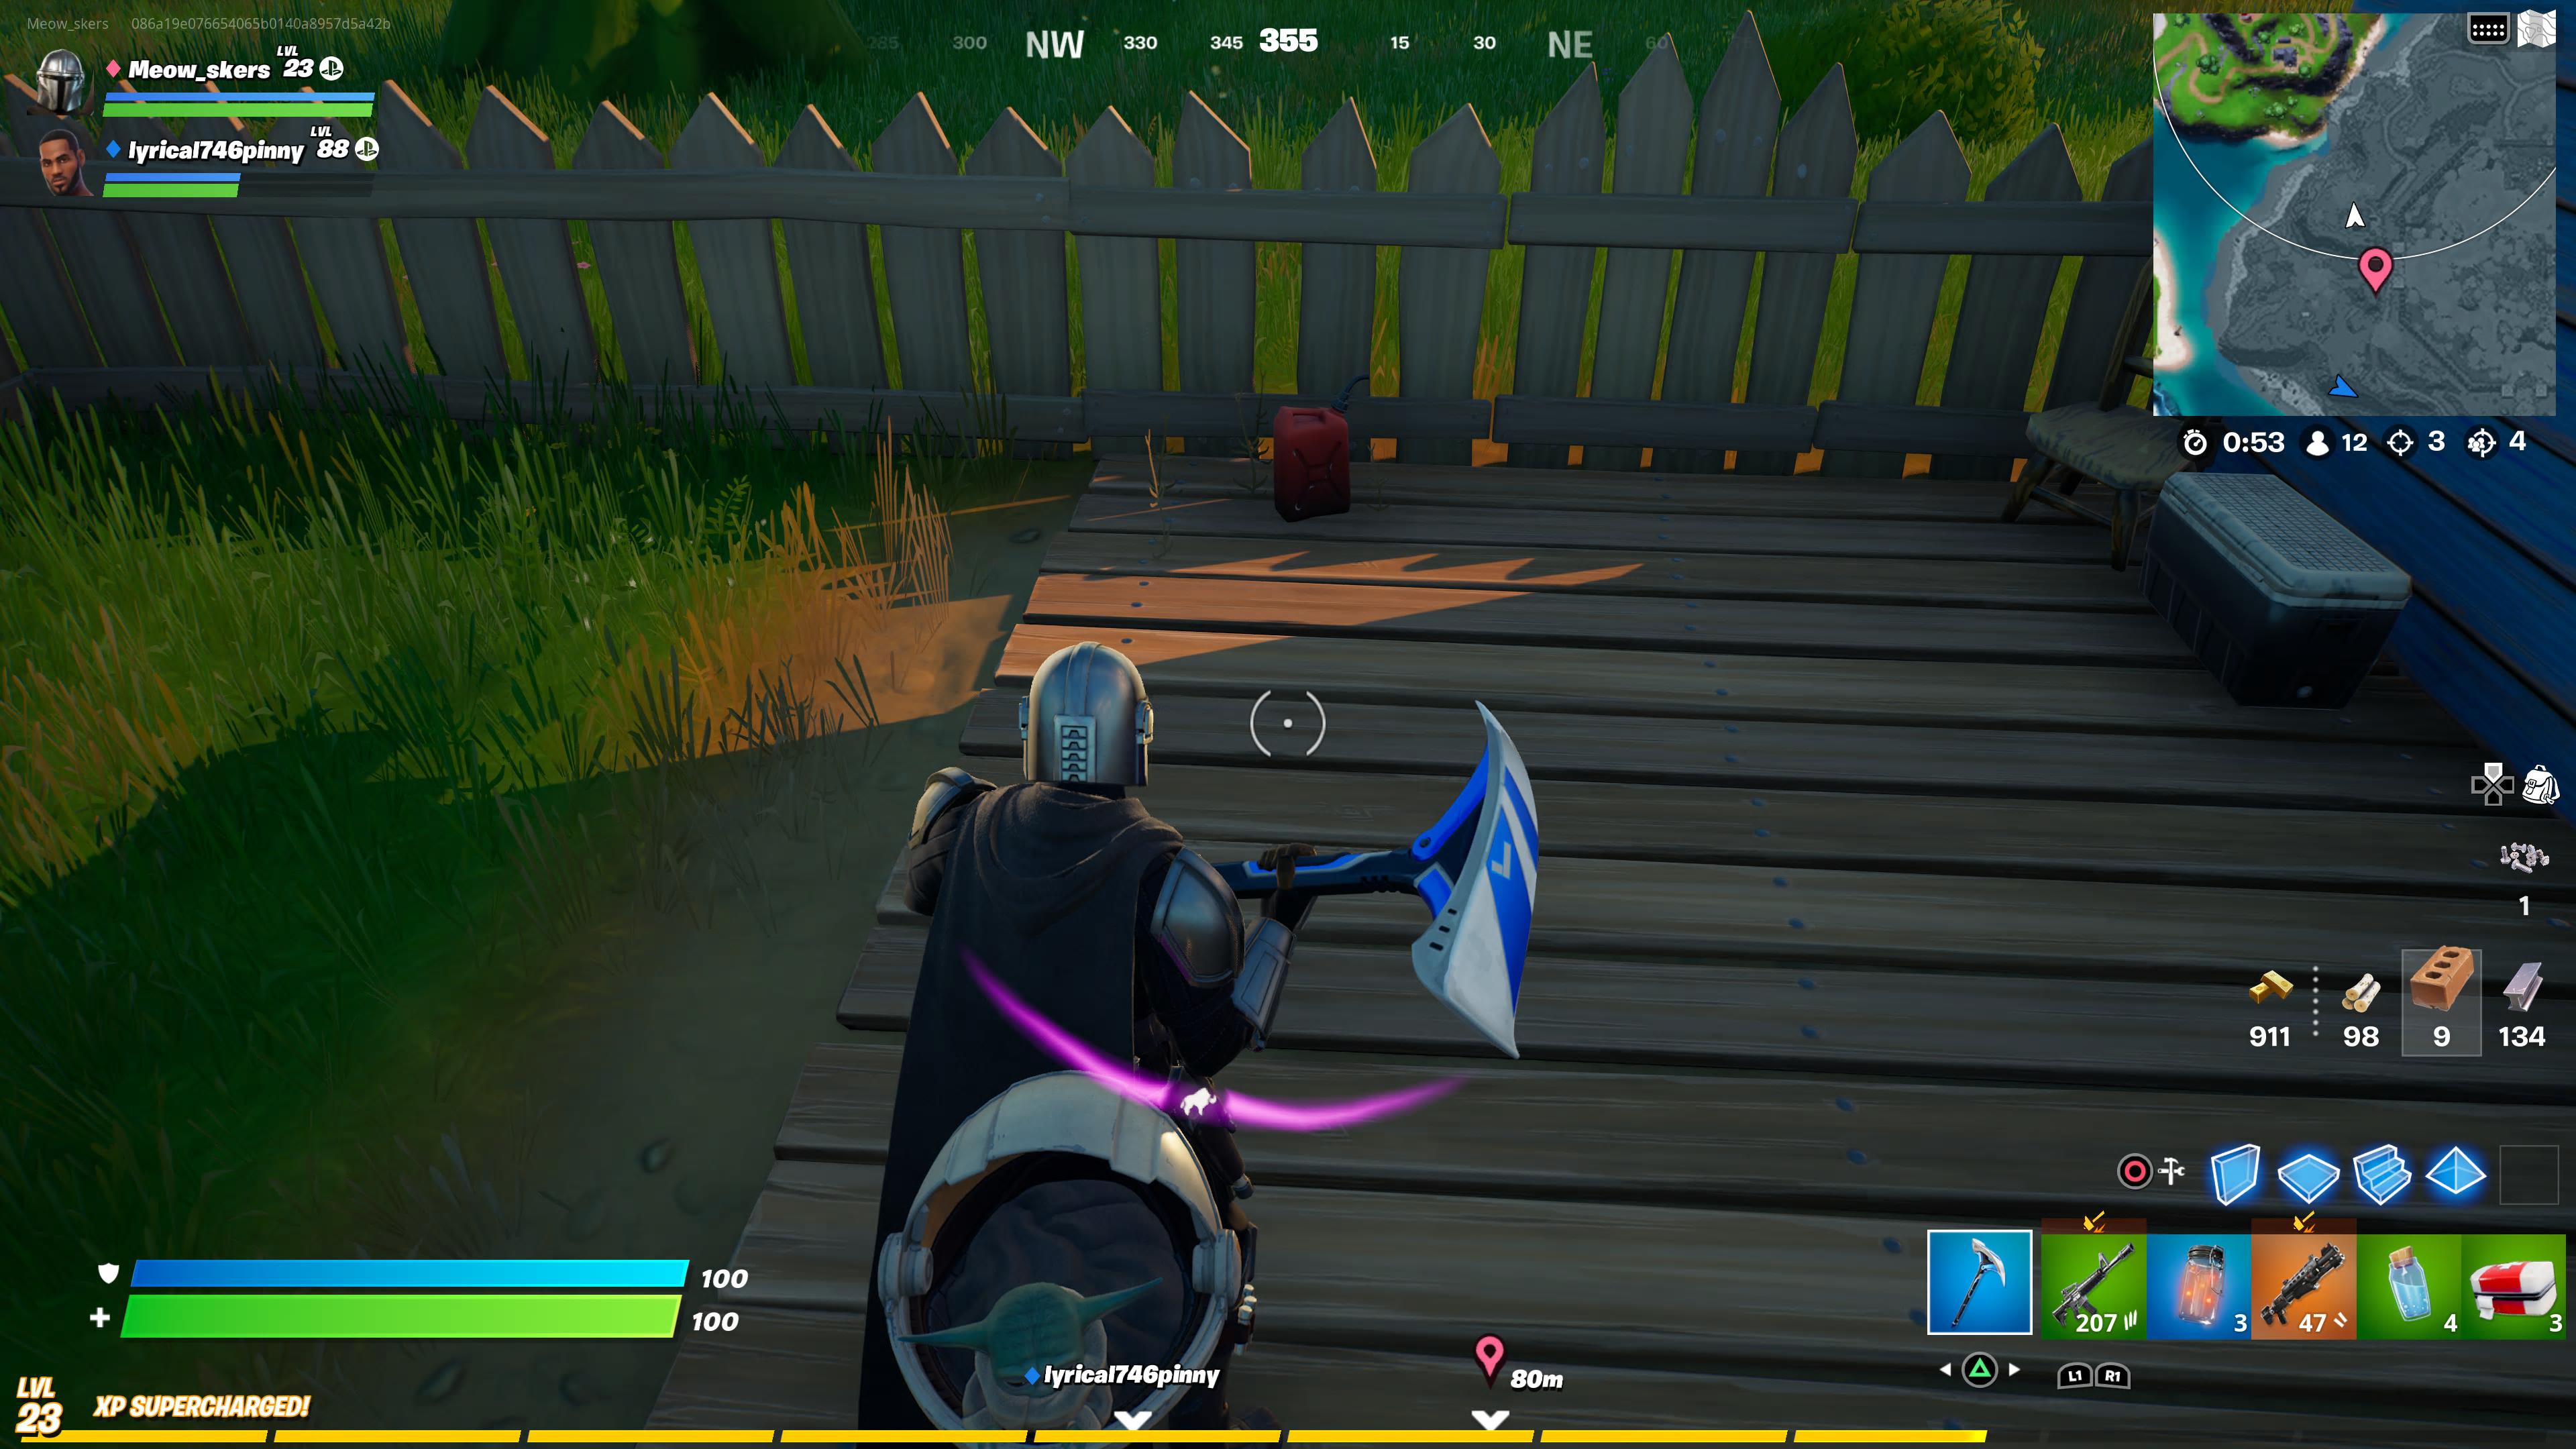 Gas canister in Fortnite.